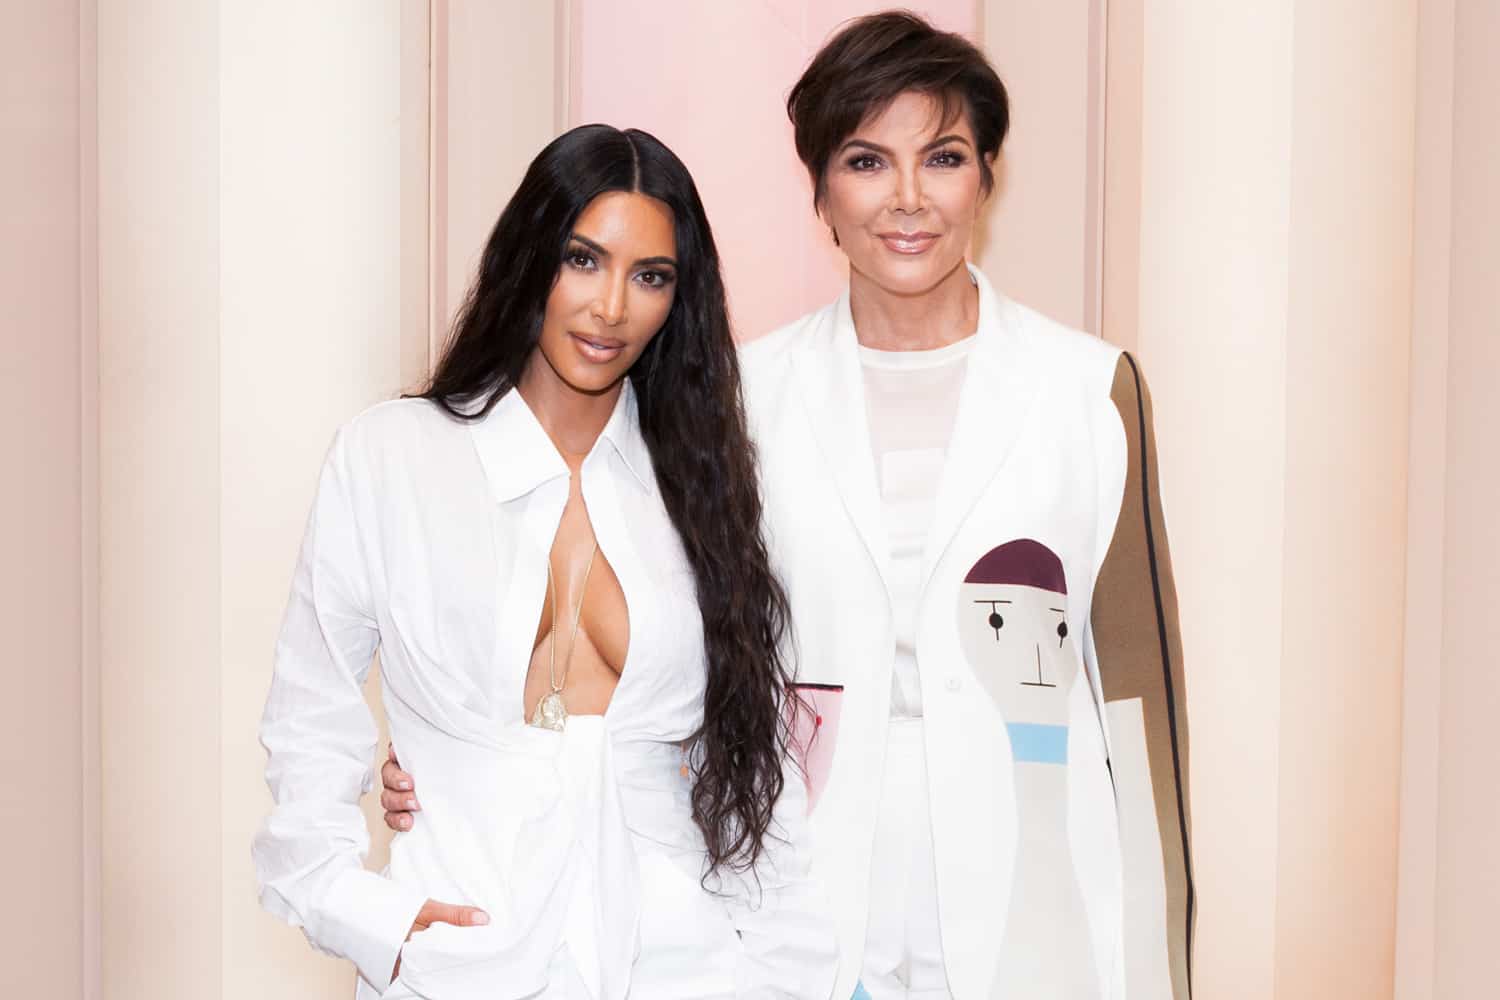 Kim Says Kris Stole Her Shine With Lagerfeld, Injuries at Amazon